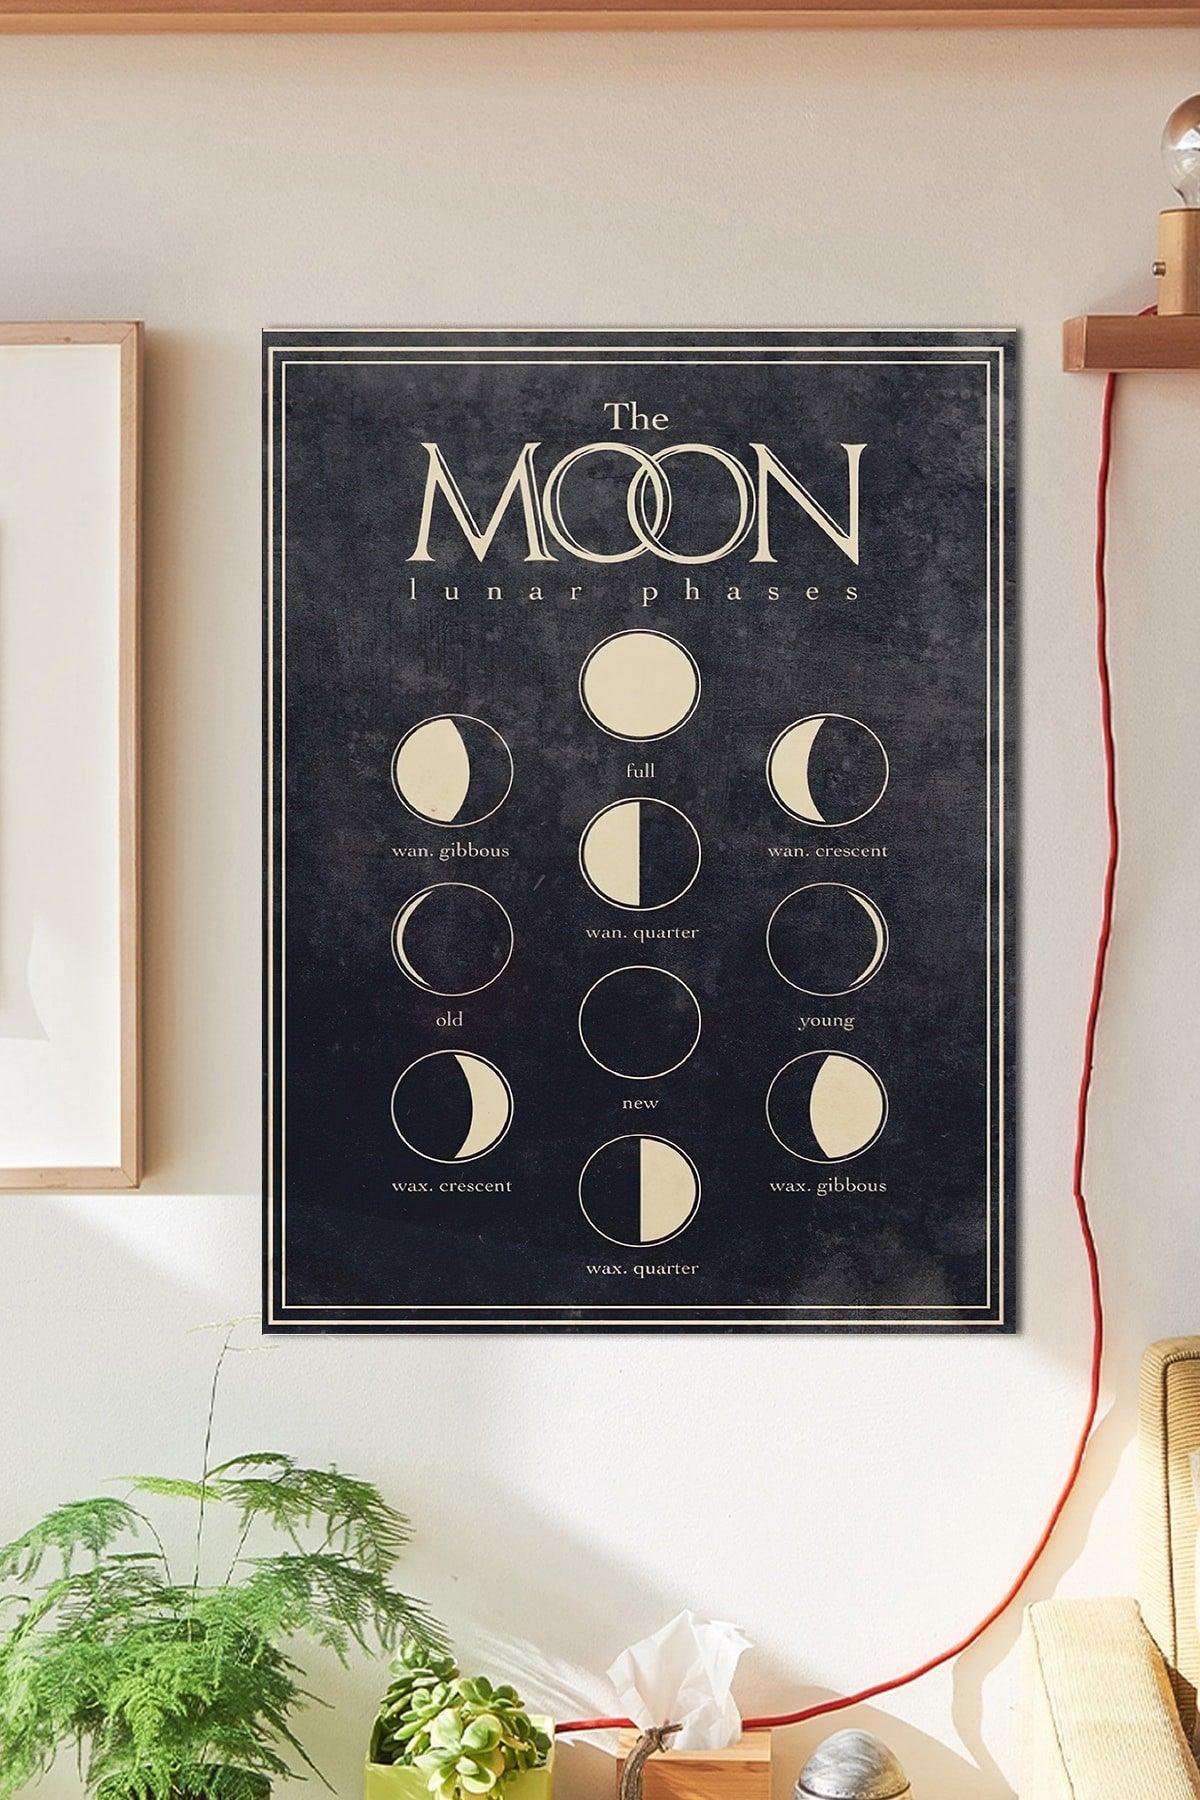 Black The Moon Wall Poster Large 45x30 Cm - Swordslife